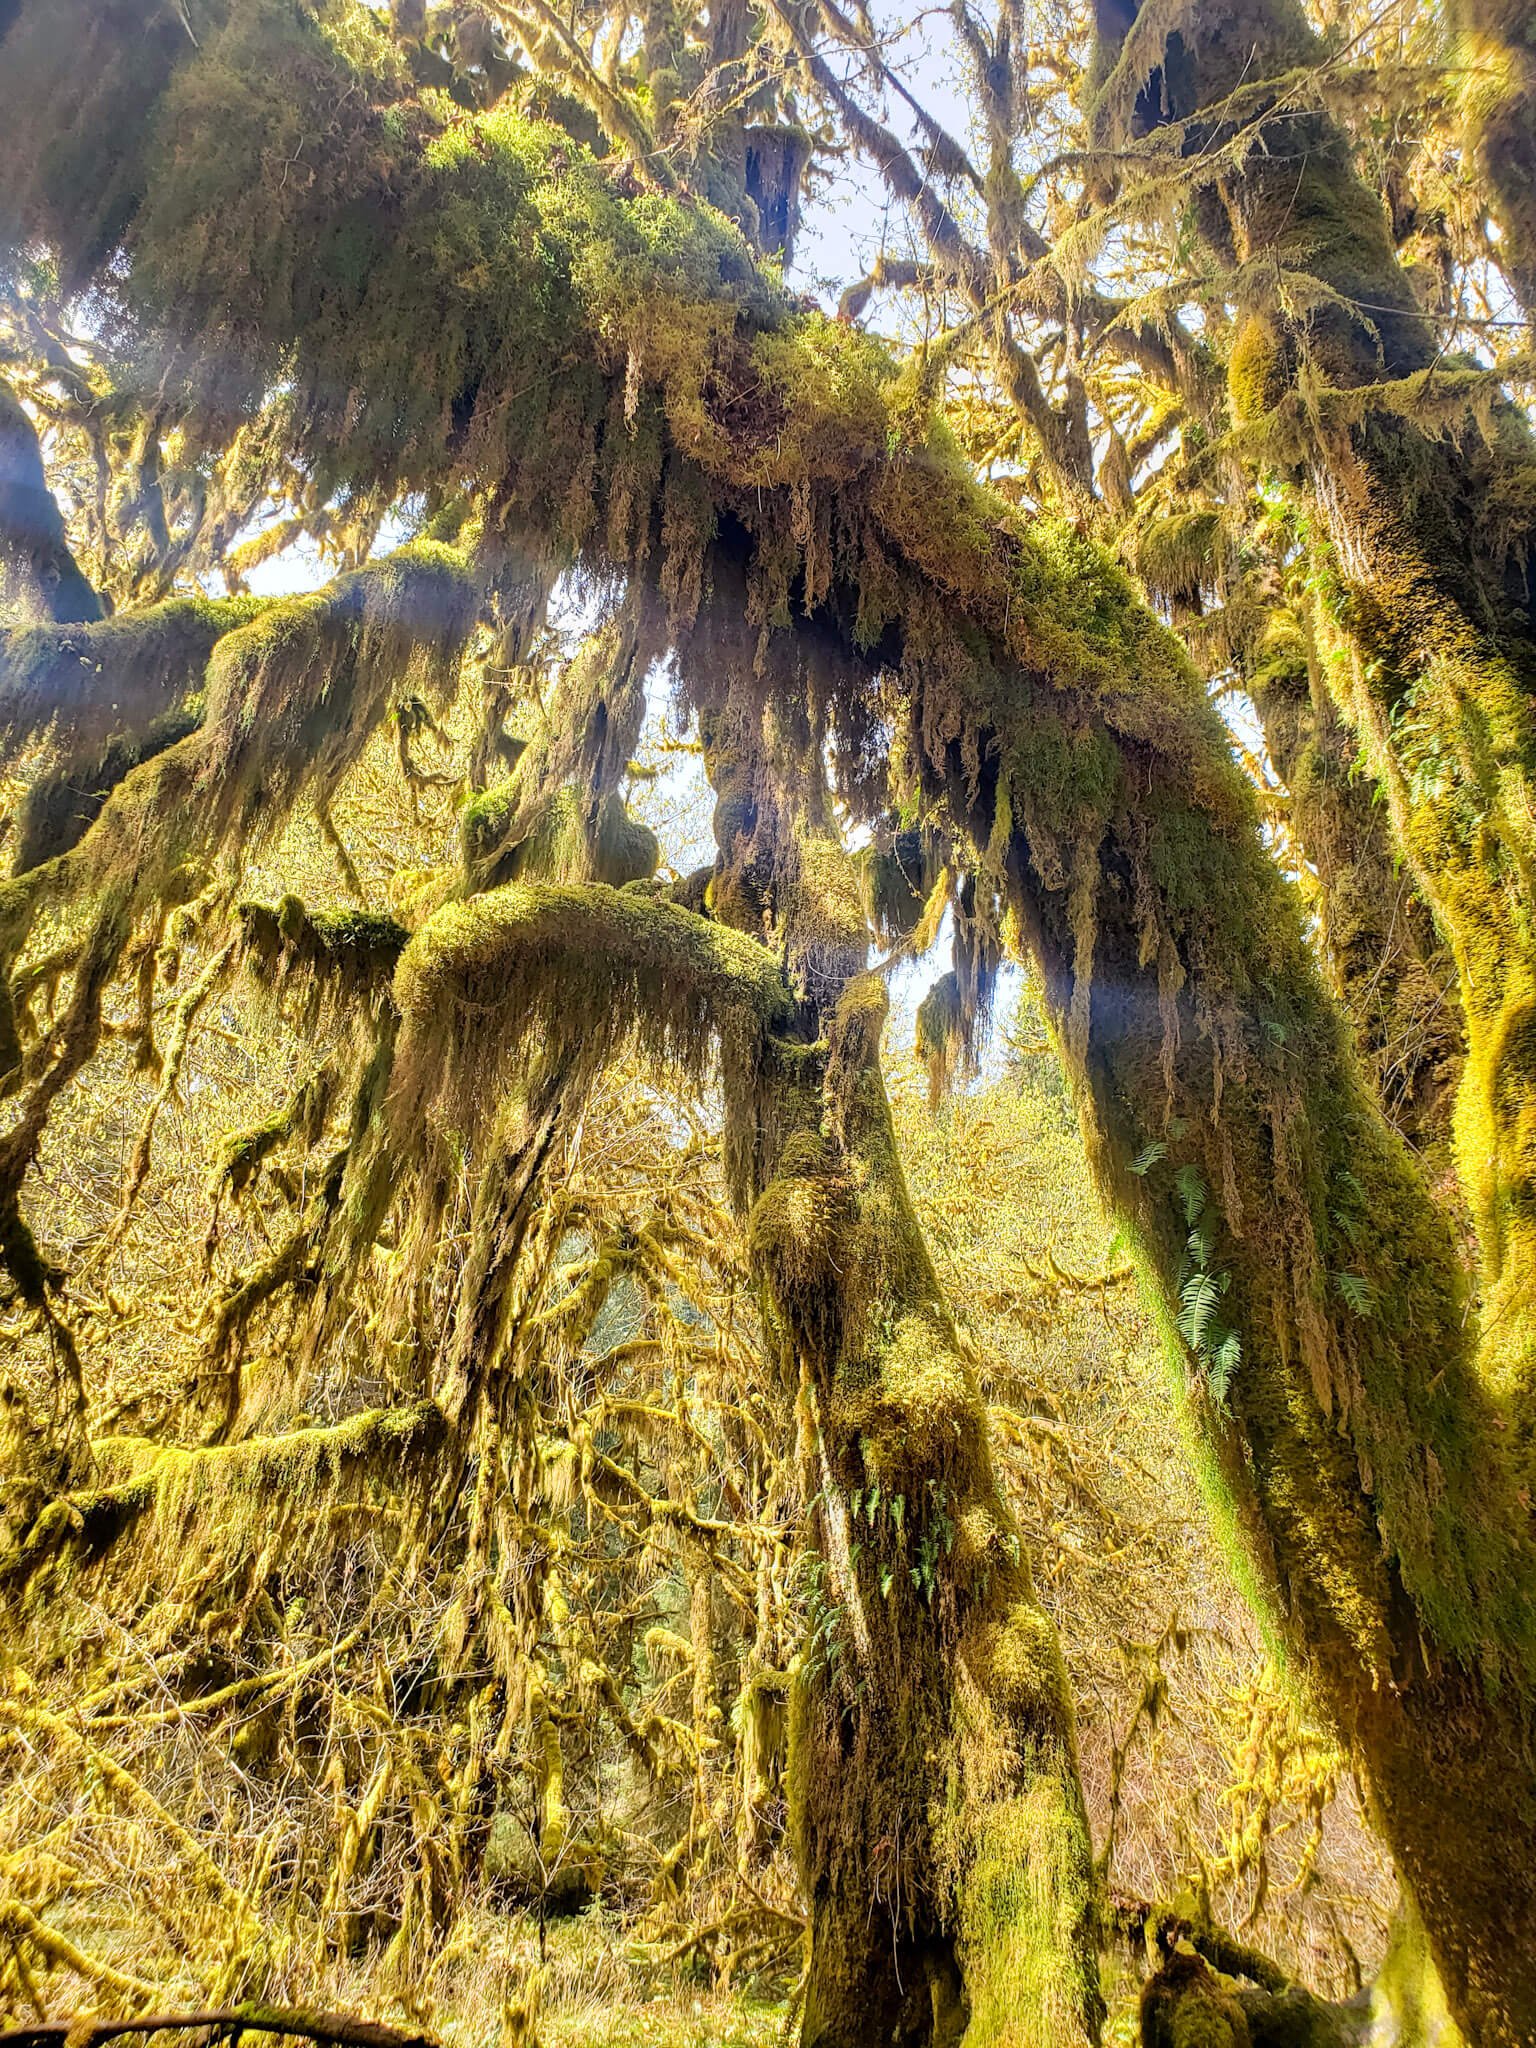 Hall of Mosses Trail at the Hoh Rainforest